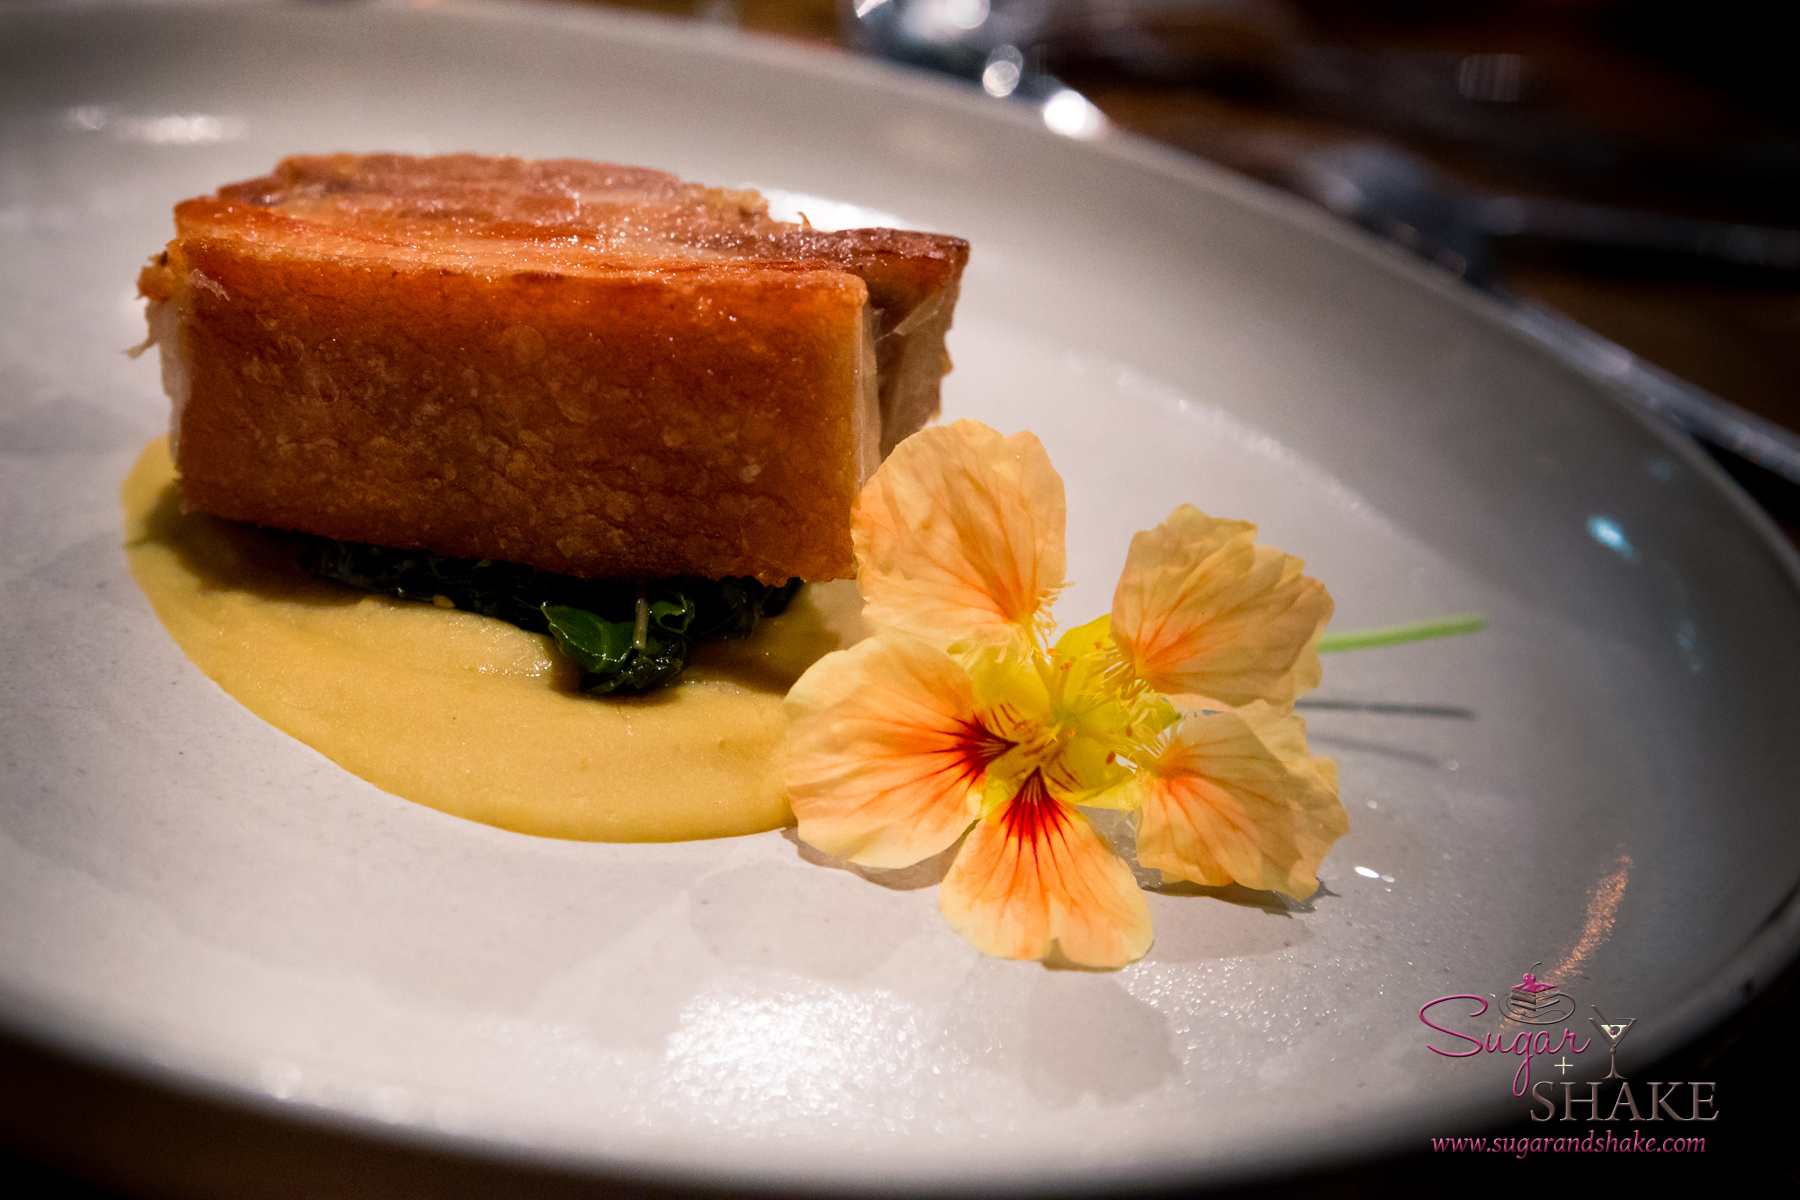 Holoholo General Store Spring Harvest Dinner at Livestock Tavern. Course Six: Pork belly confit, sautéed rainbow chard and baby kale, red lentil purée. Wine pairing: Seven Hills, Cabernet Sauvignon 2012. Columbia Valley. © 2015 Sugar + Shake